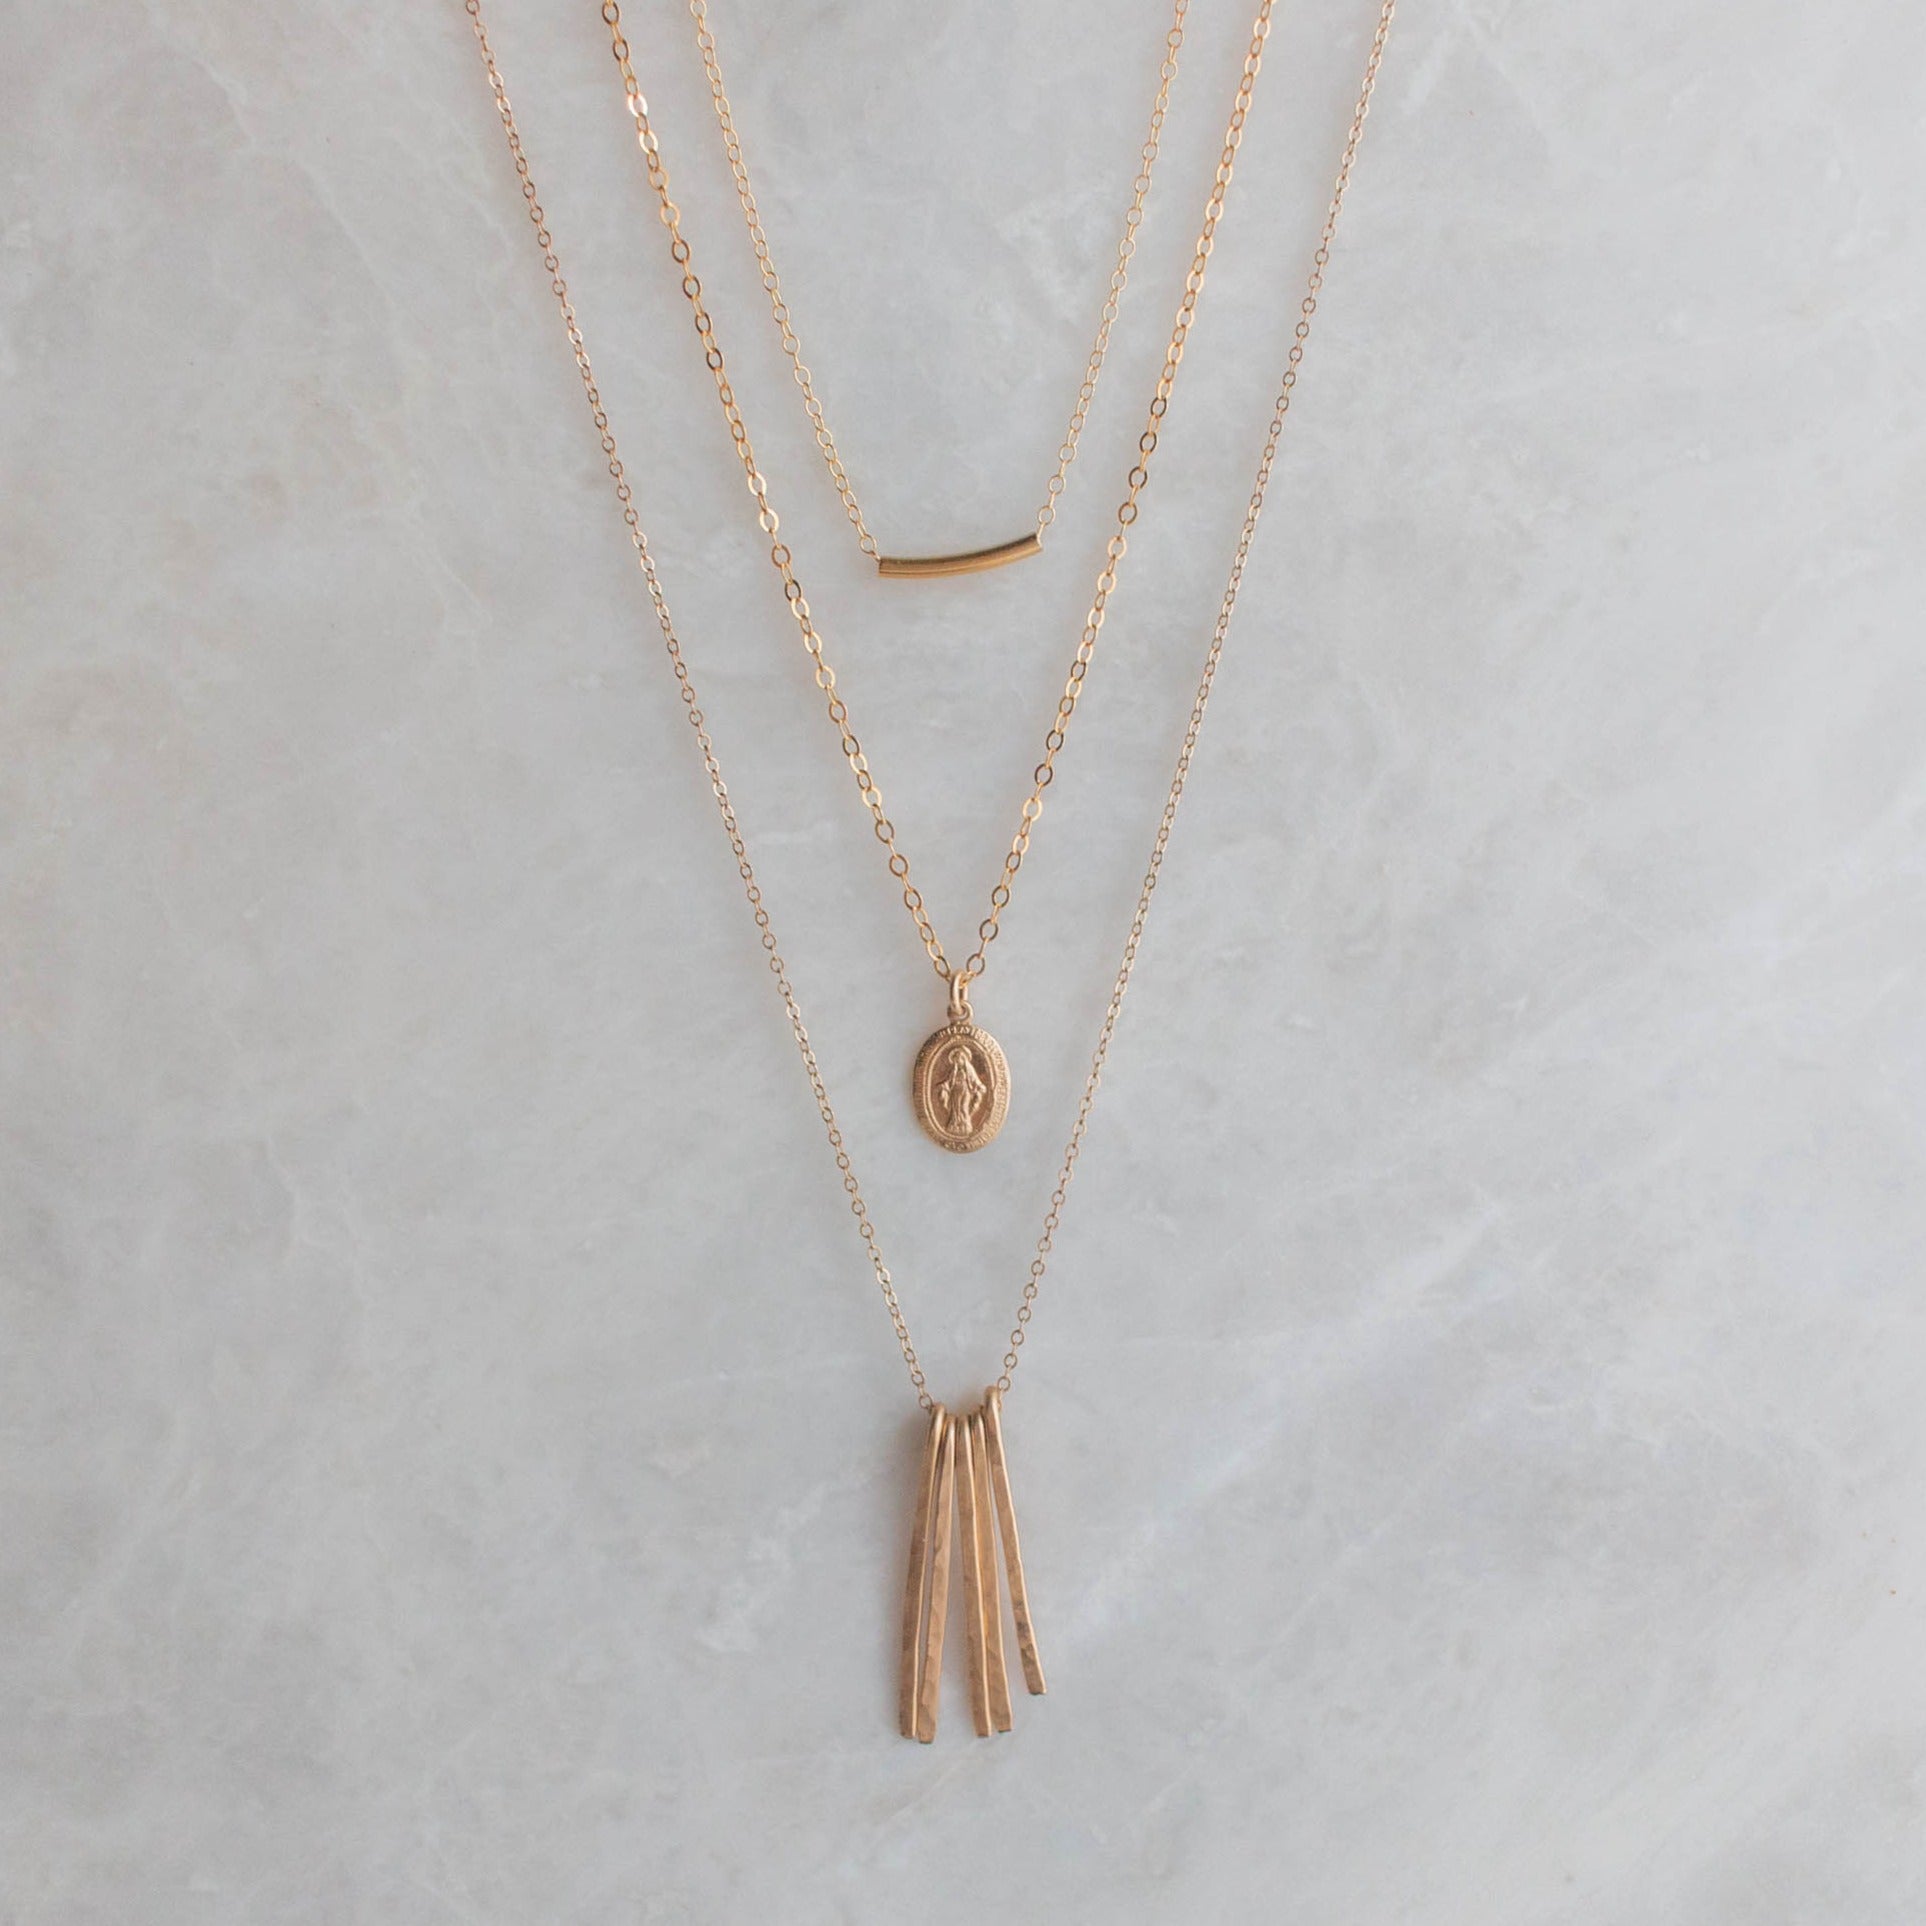 Necklace Trio Mary, Tiny Tube, and Gold Fringe Necklace